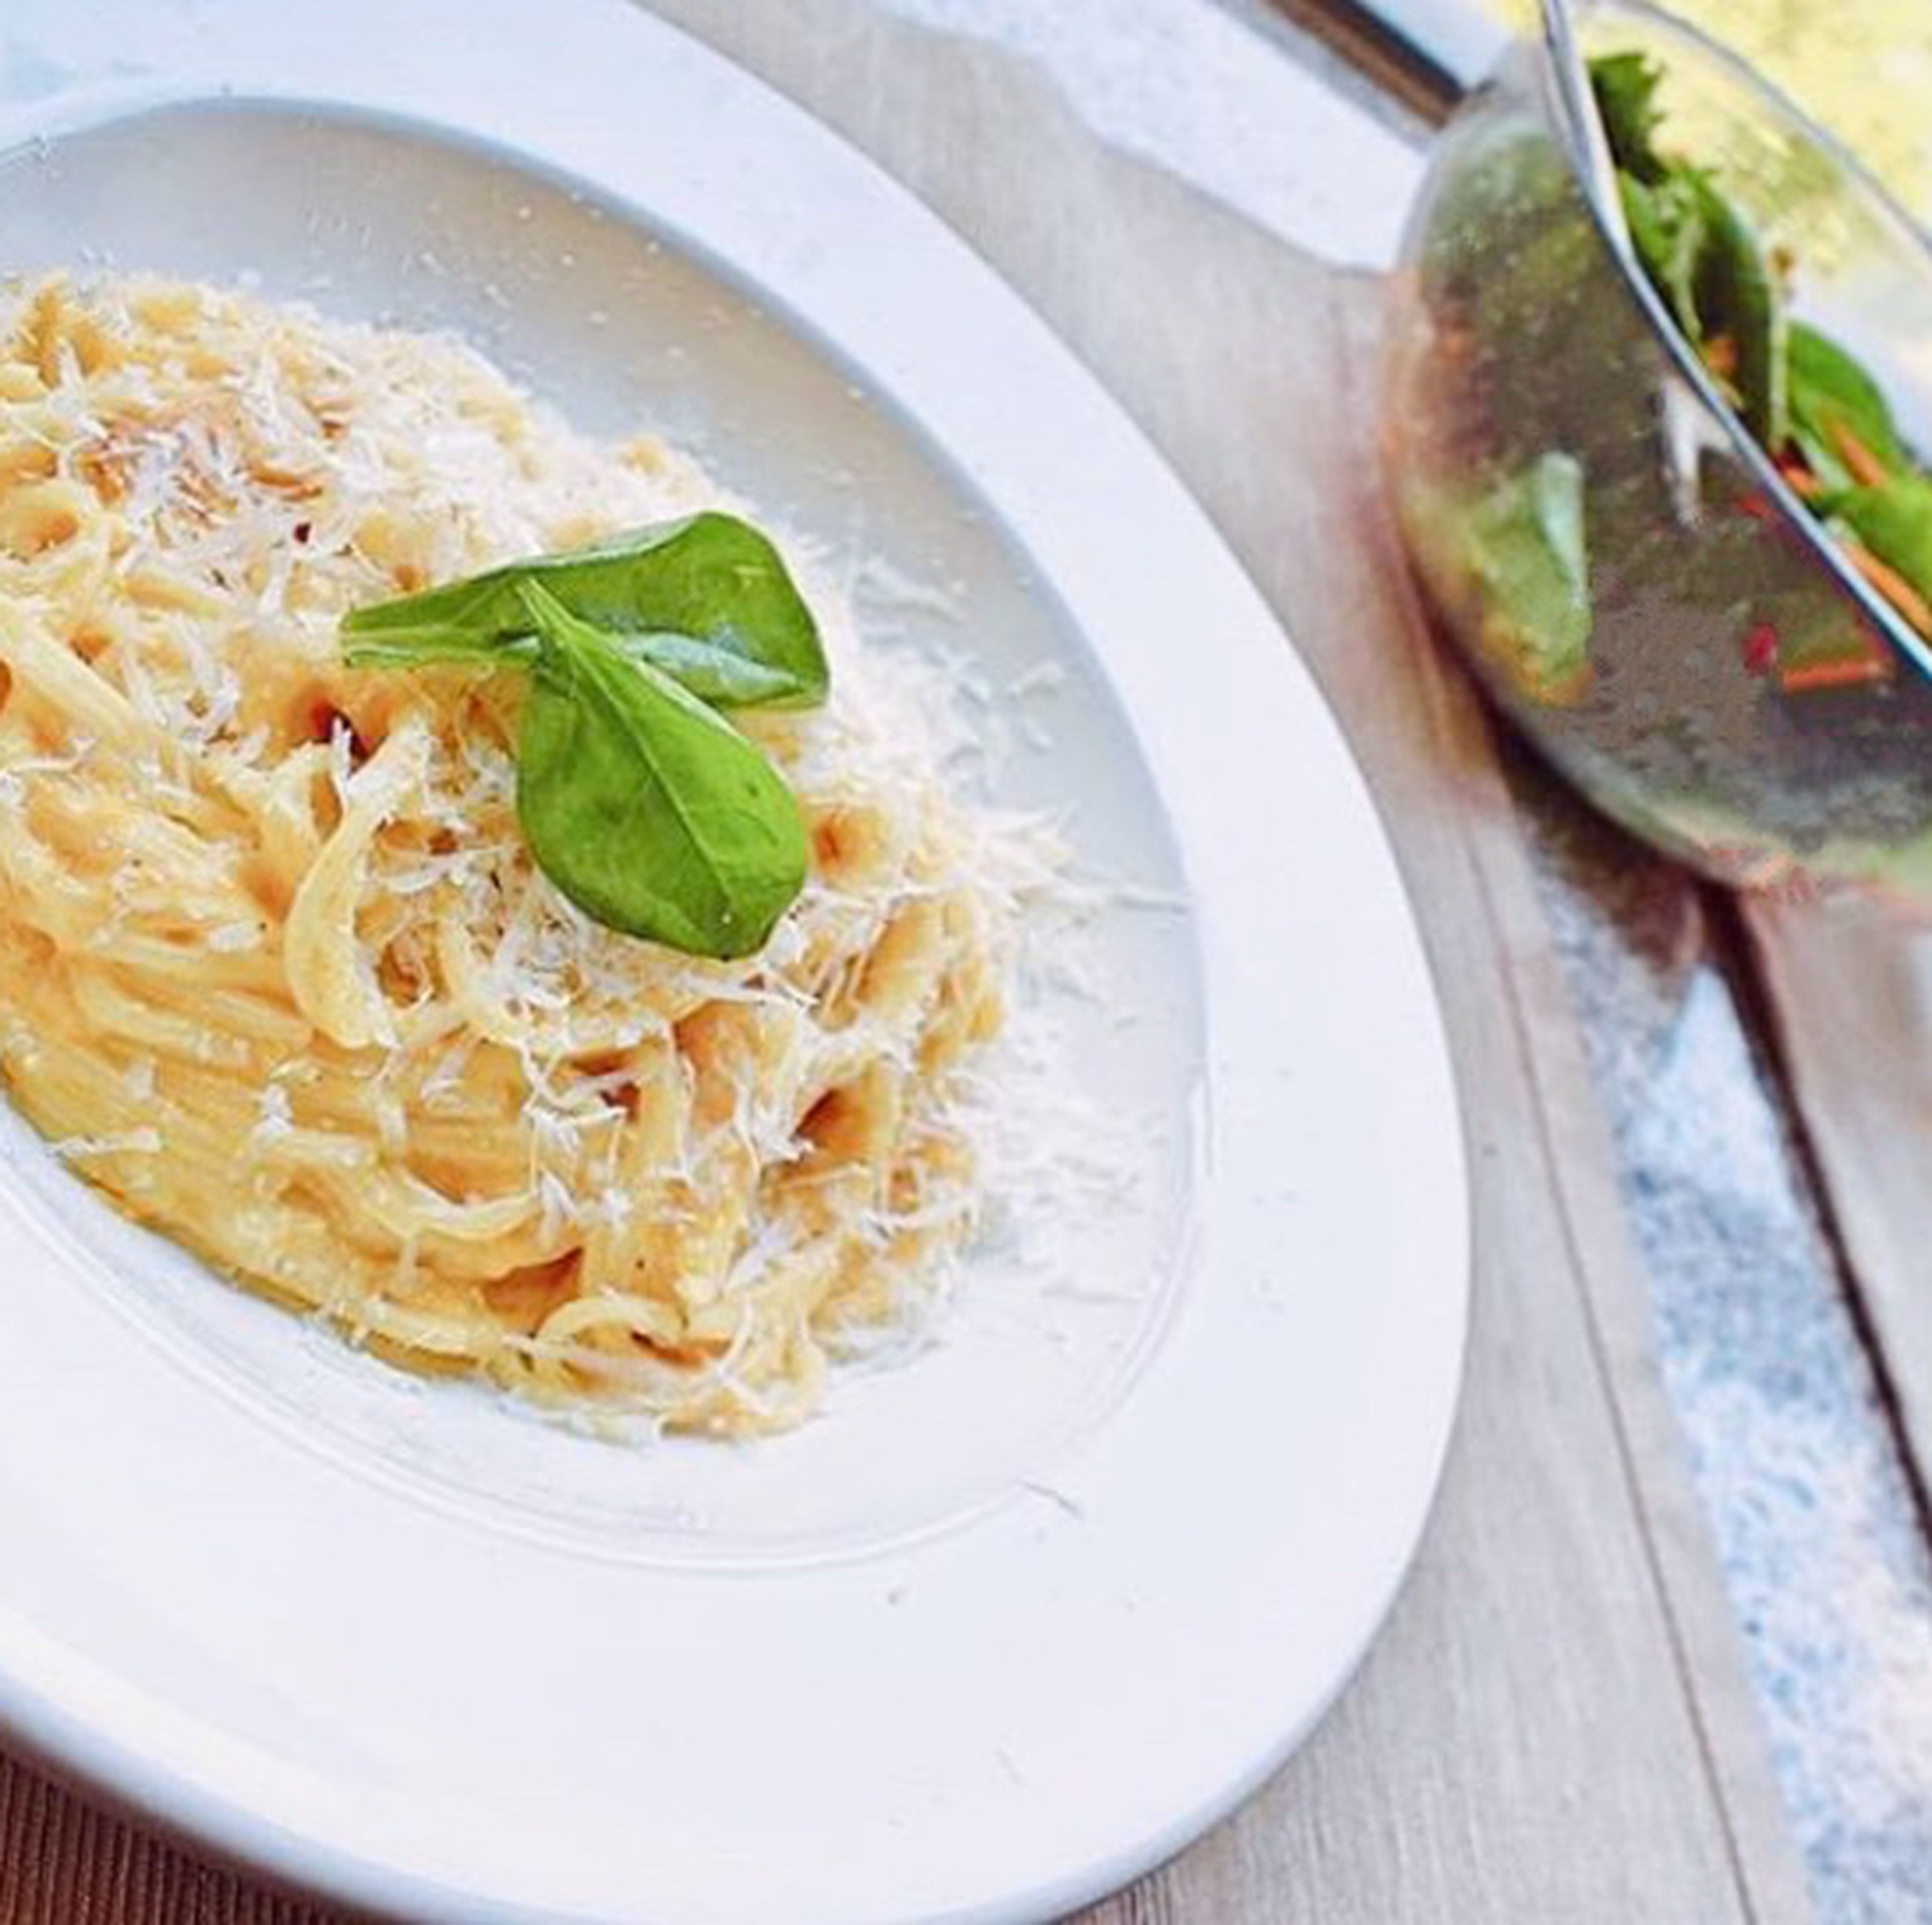 Combine the cheese sauce with the spaghetti and plate. Garnish with more cheese and serve warm.